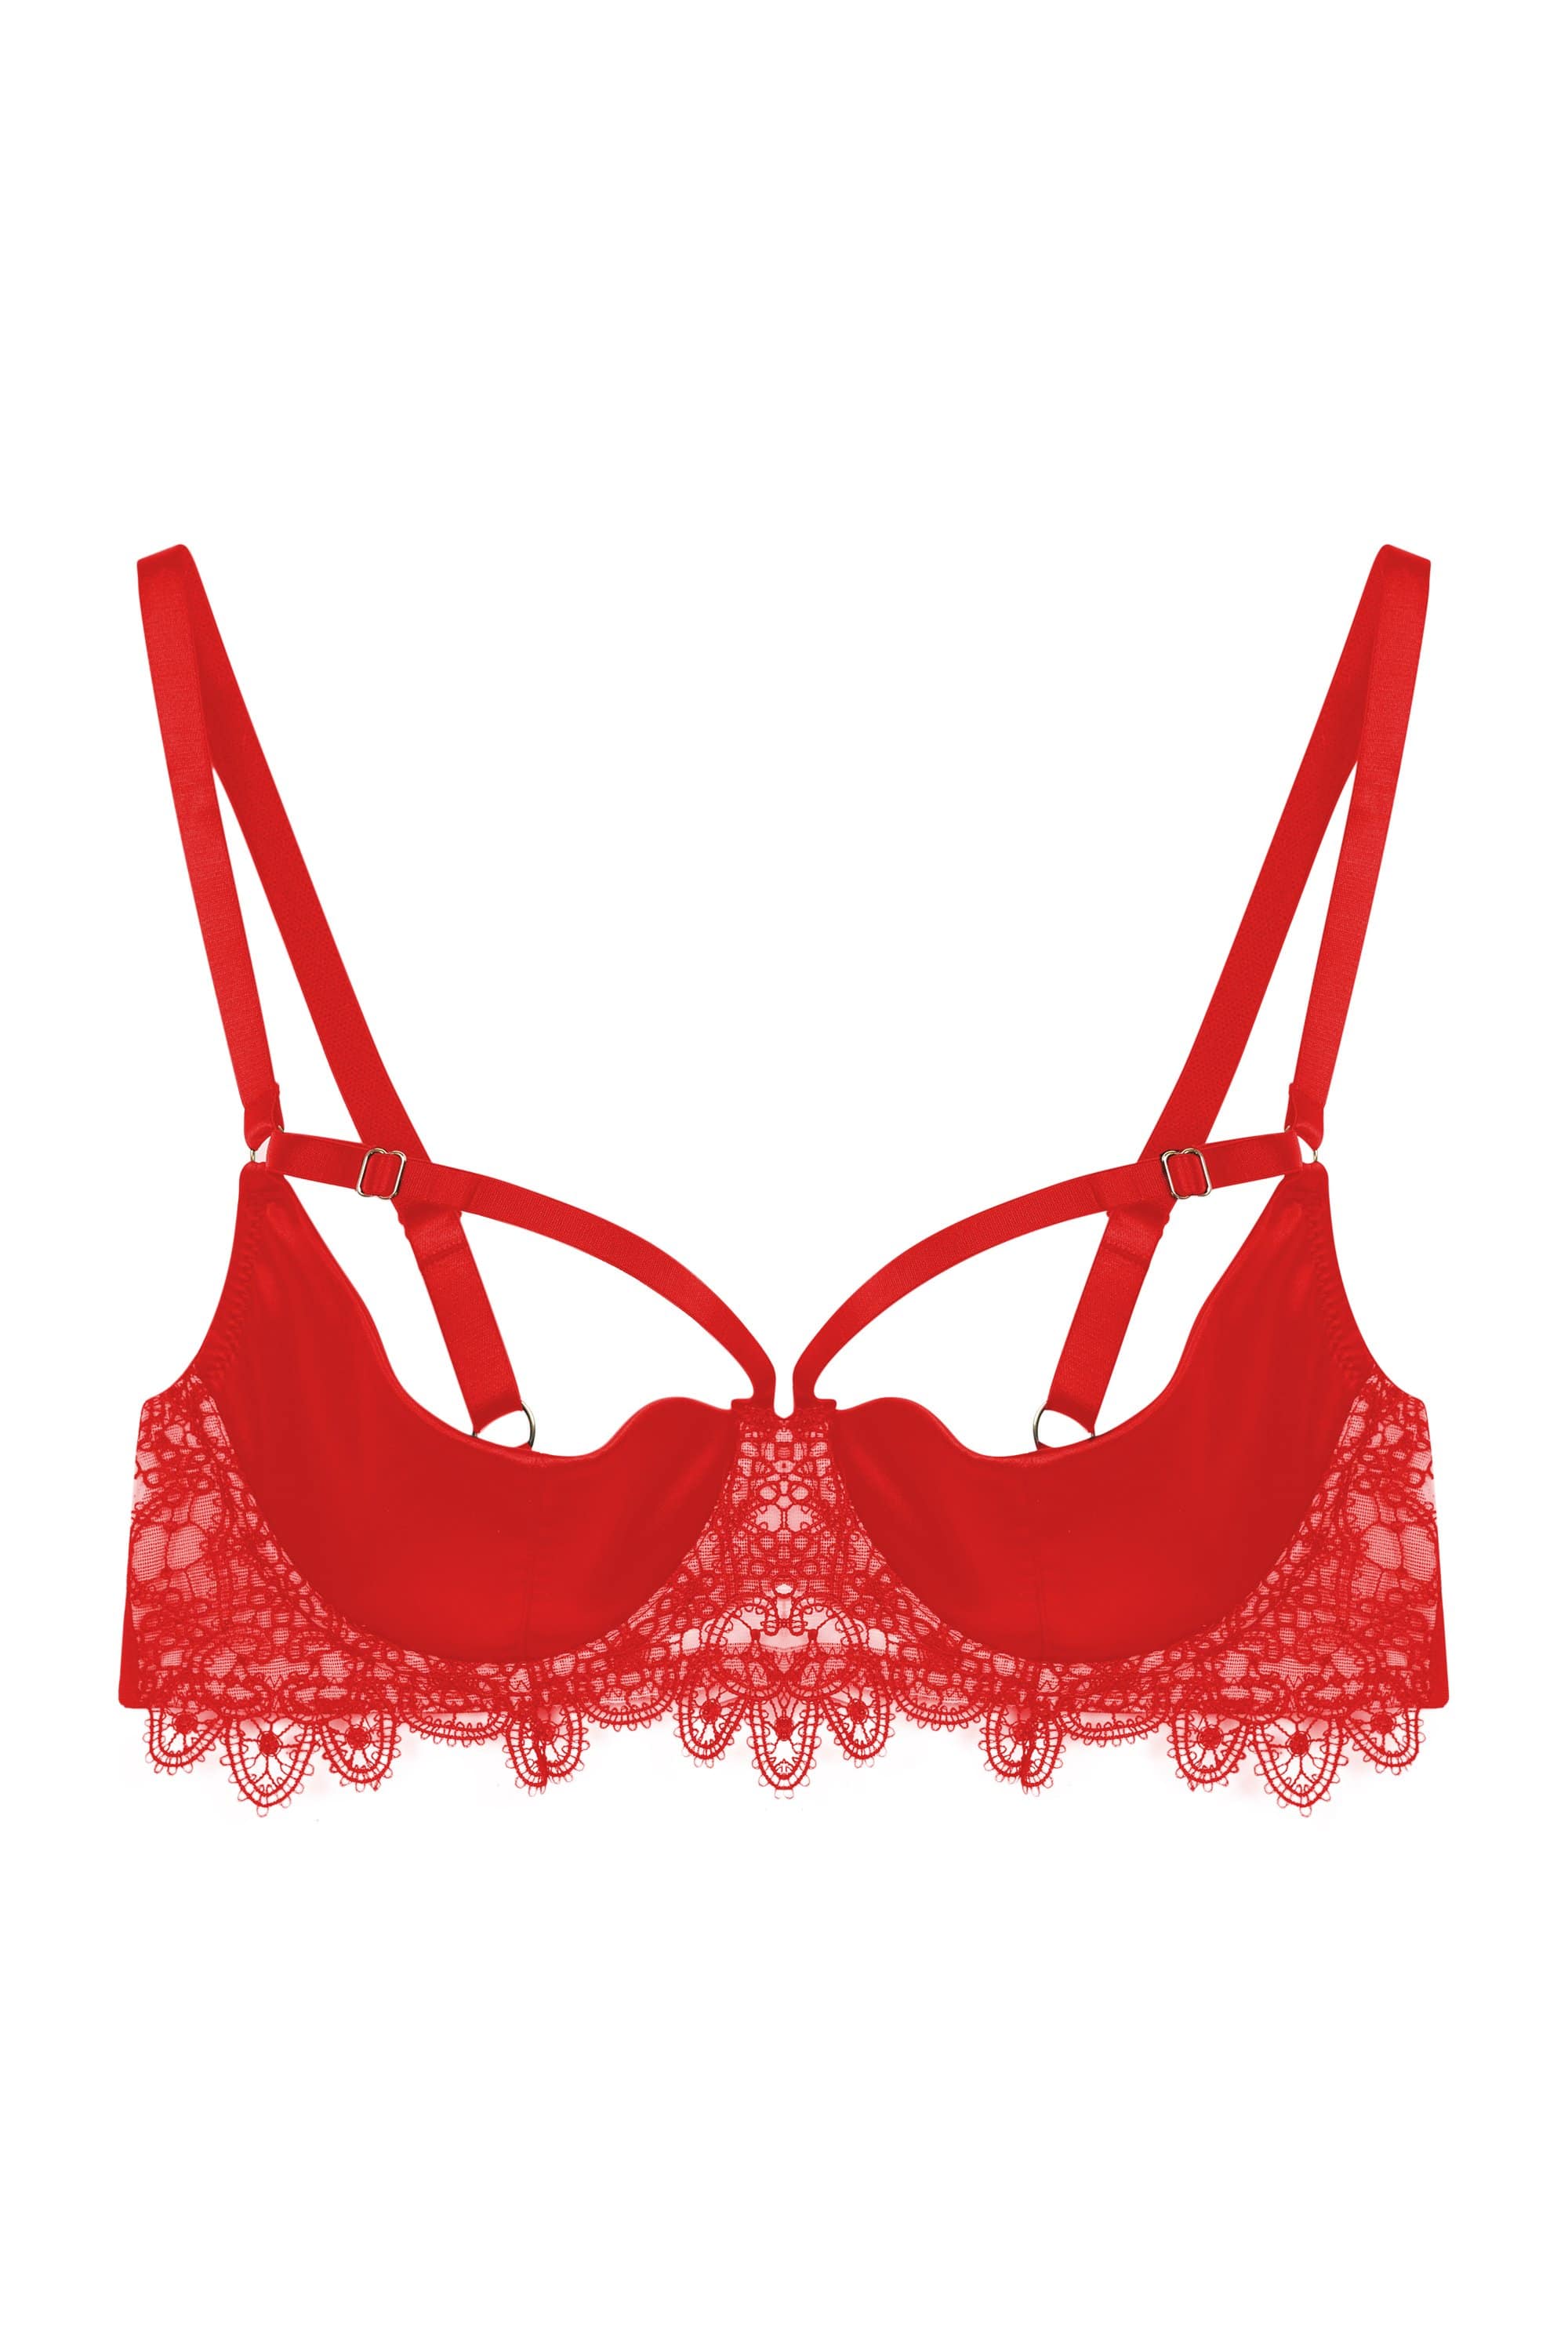 Kris Line Alice Half Cup Soft Bra in Black and Red Back Size 36